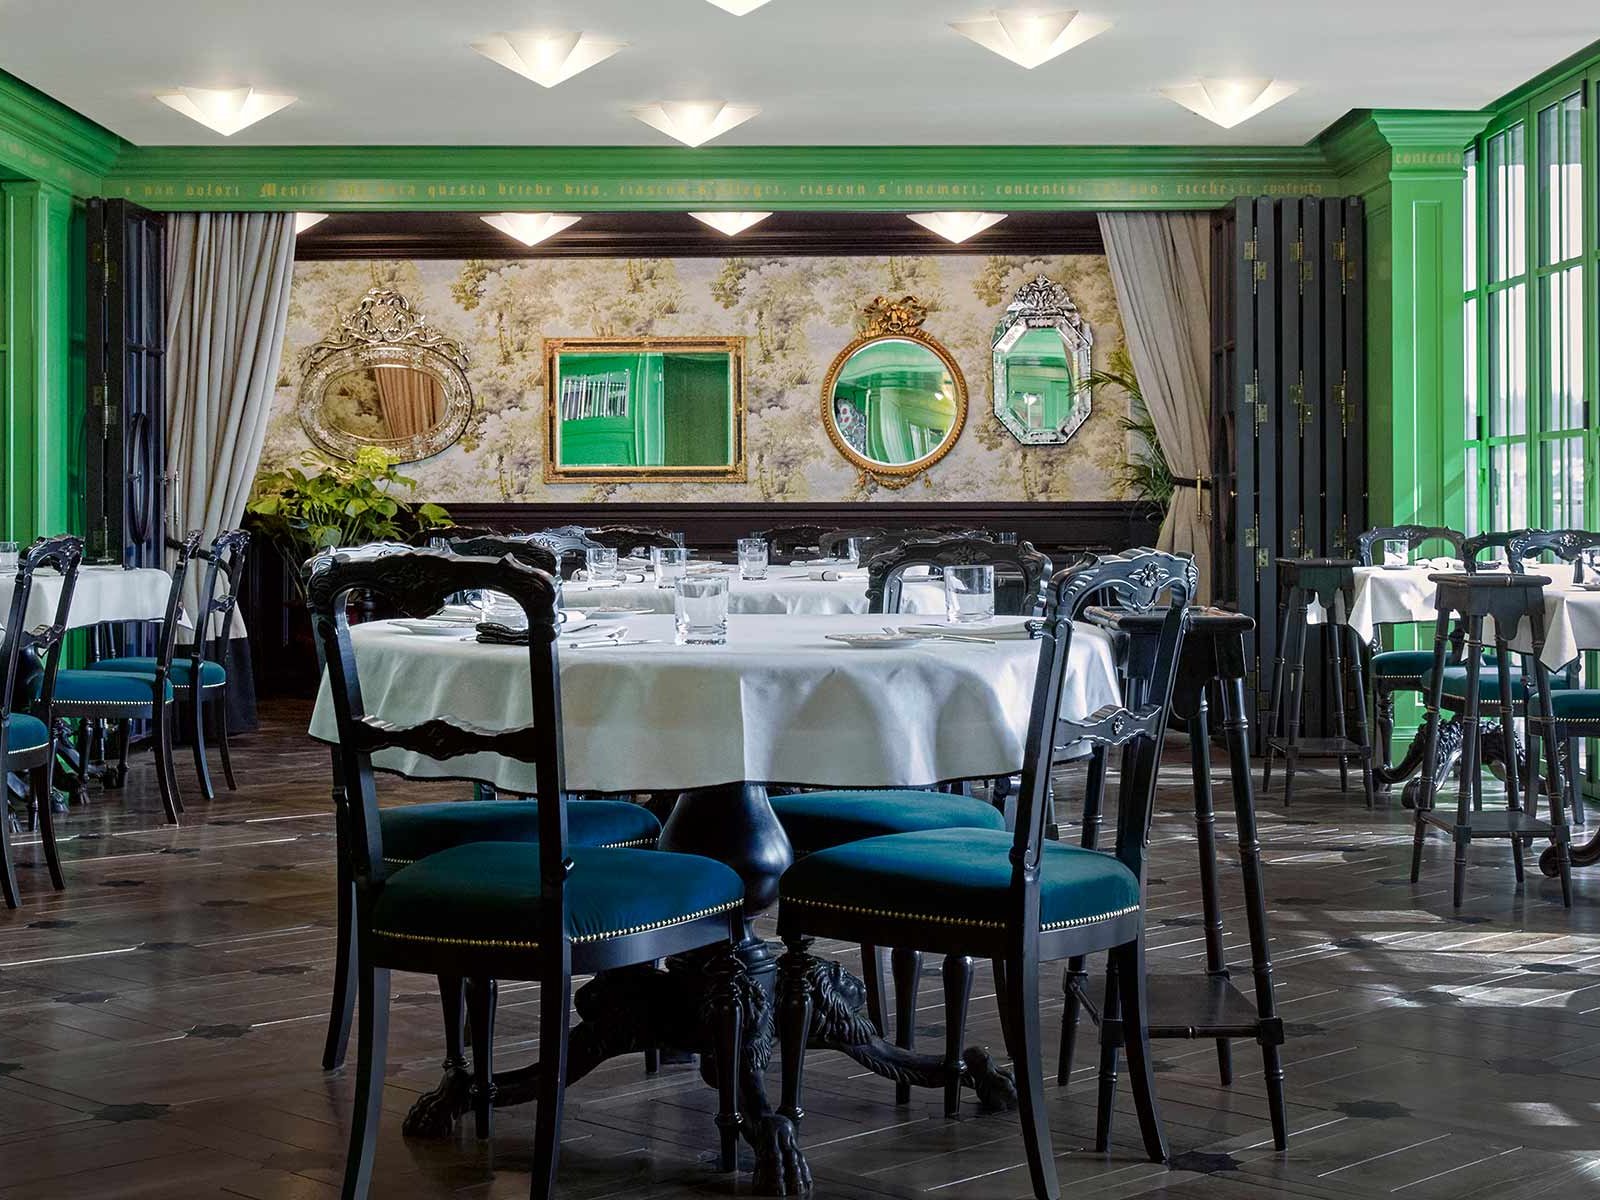 Splashes of green in the main dining room of the new Gucci Osteria&nbsp;in Seoul.